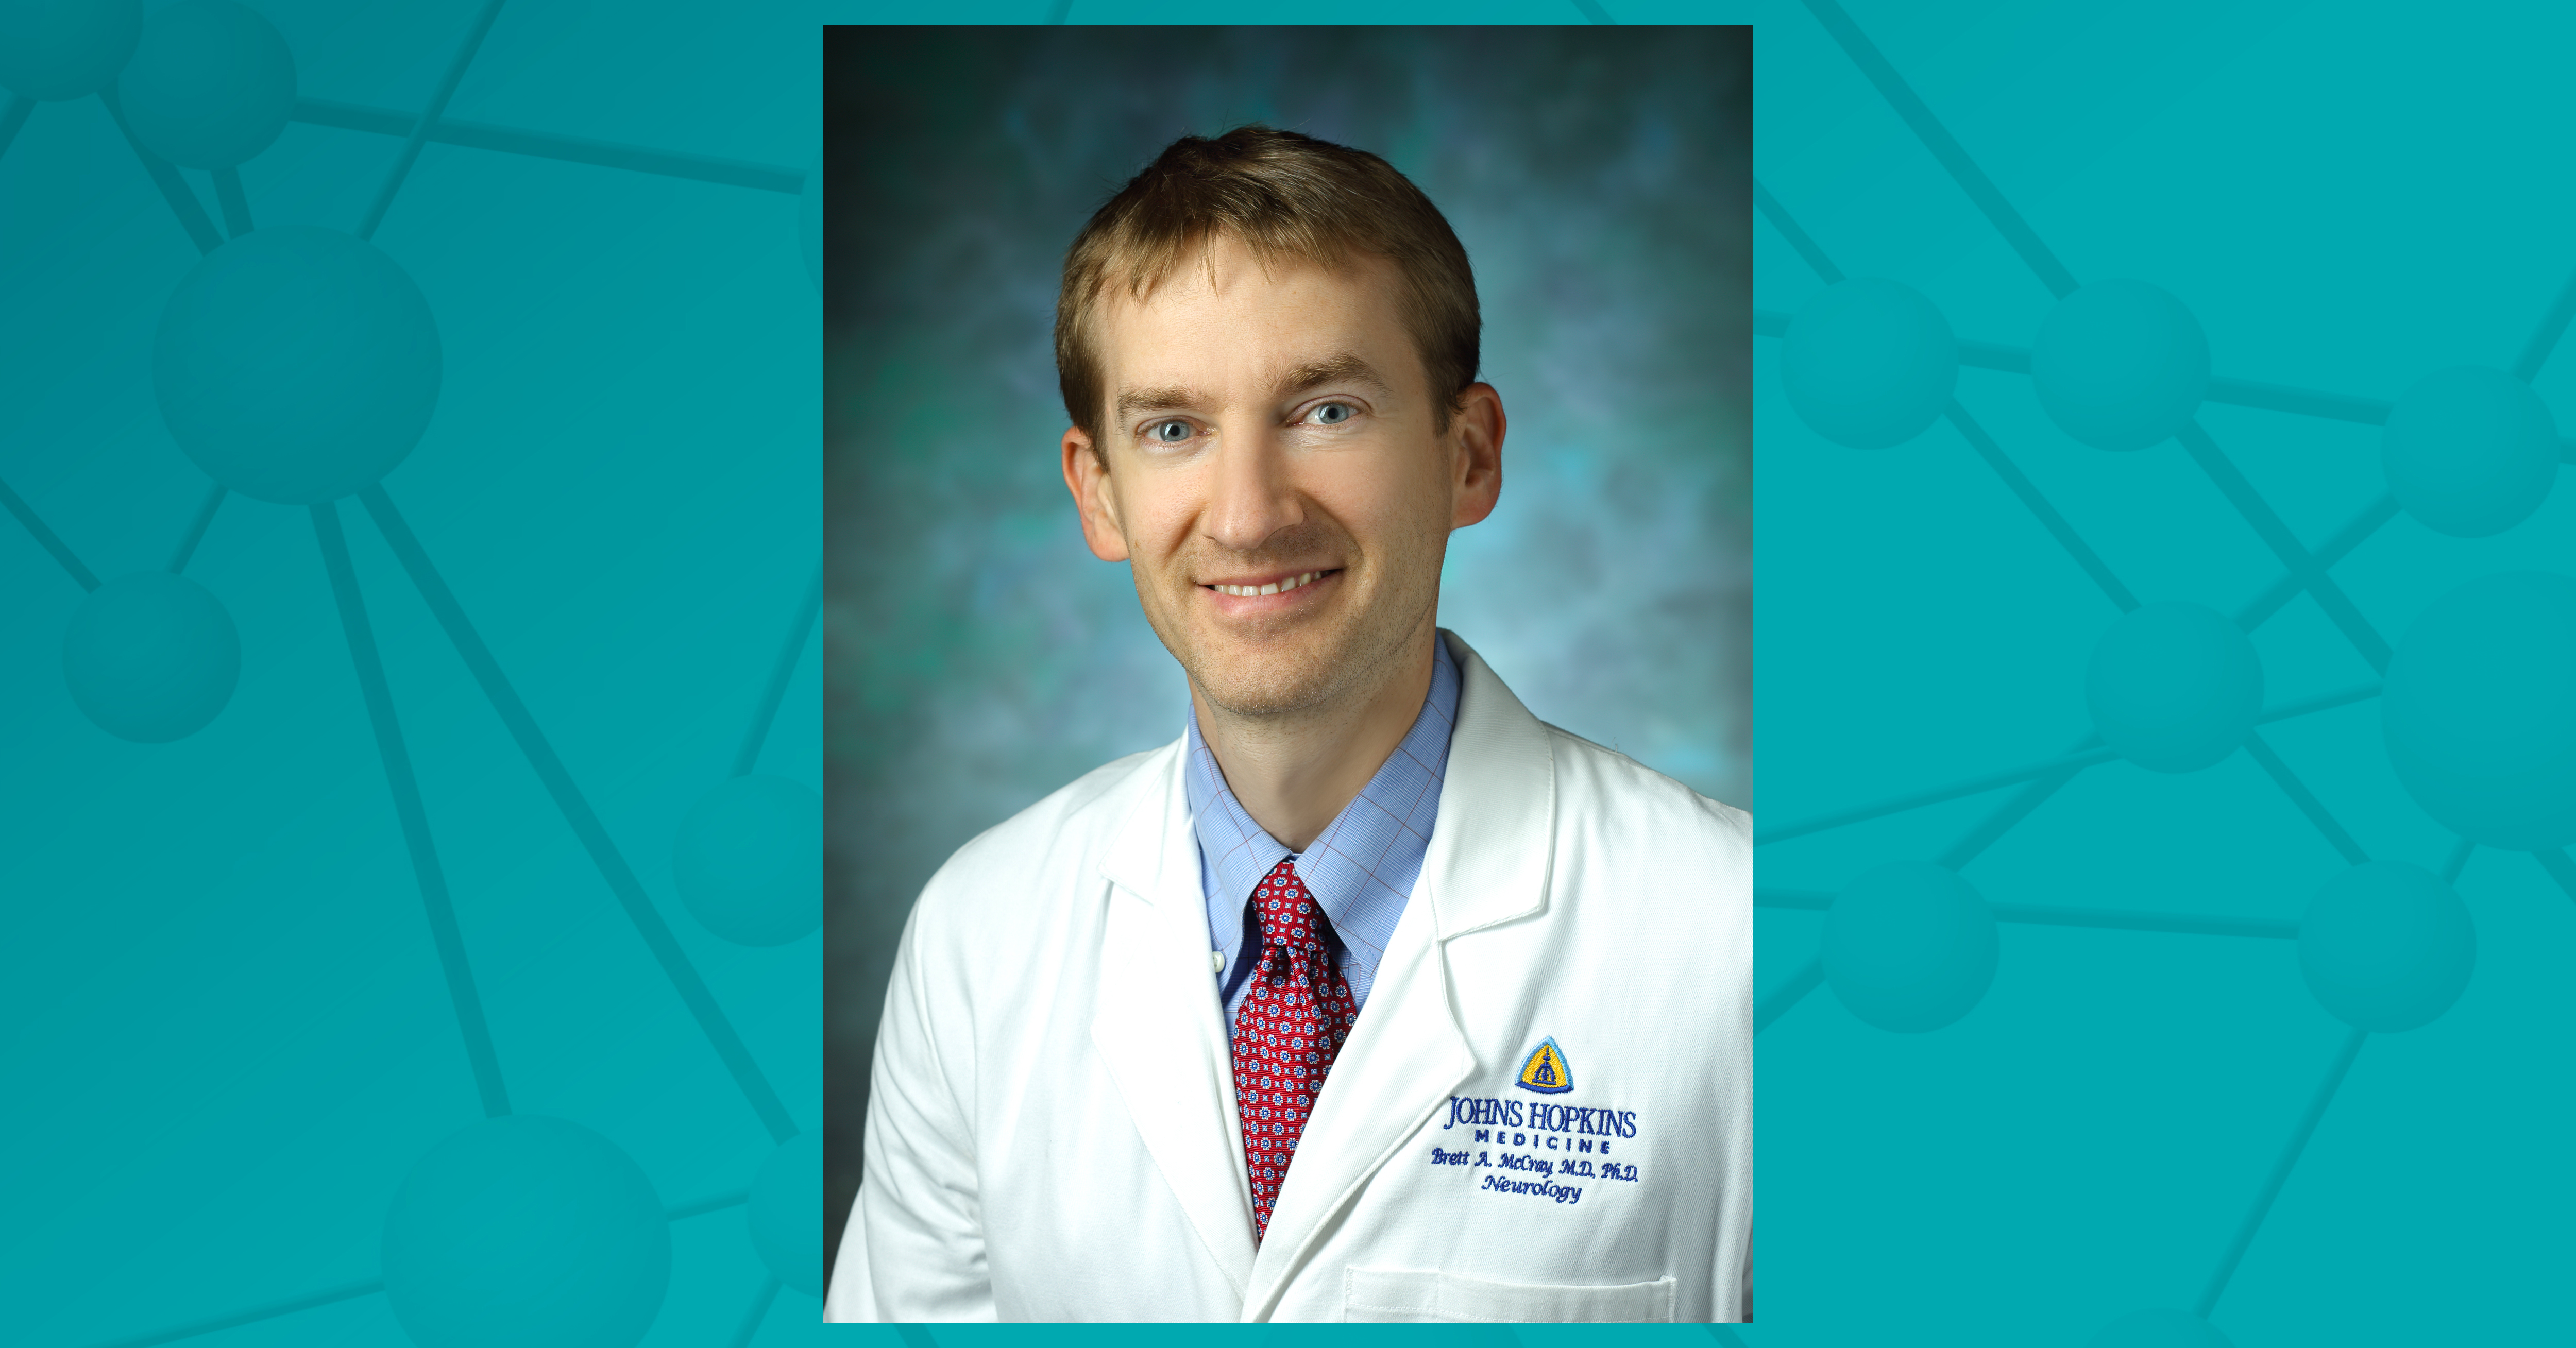 A photo of Brett McCray, MD, PhD appears against a teal background